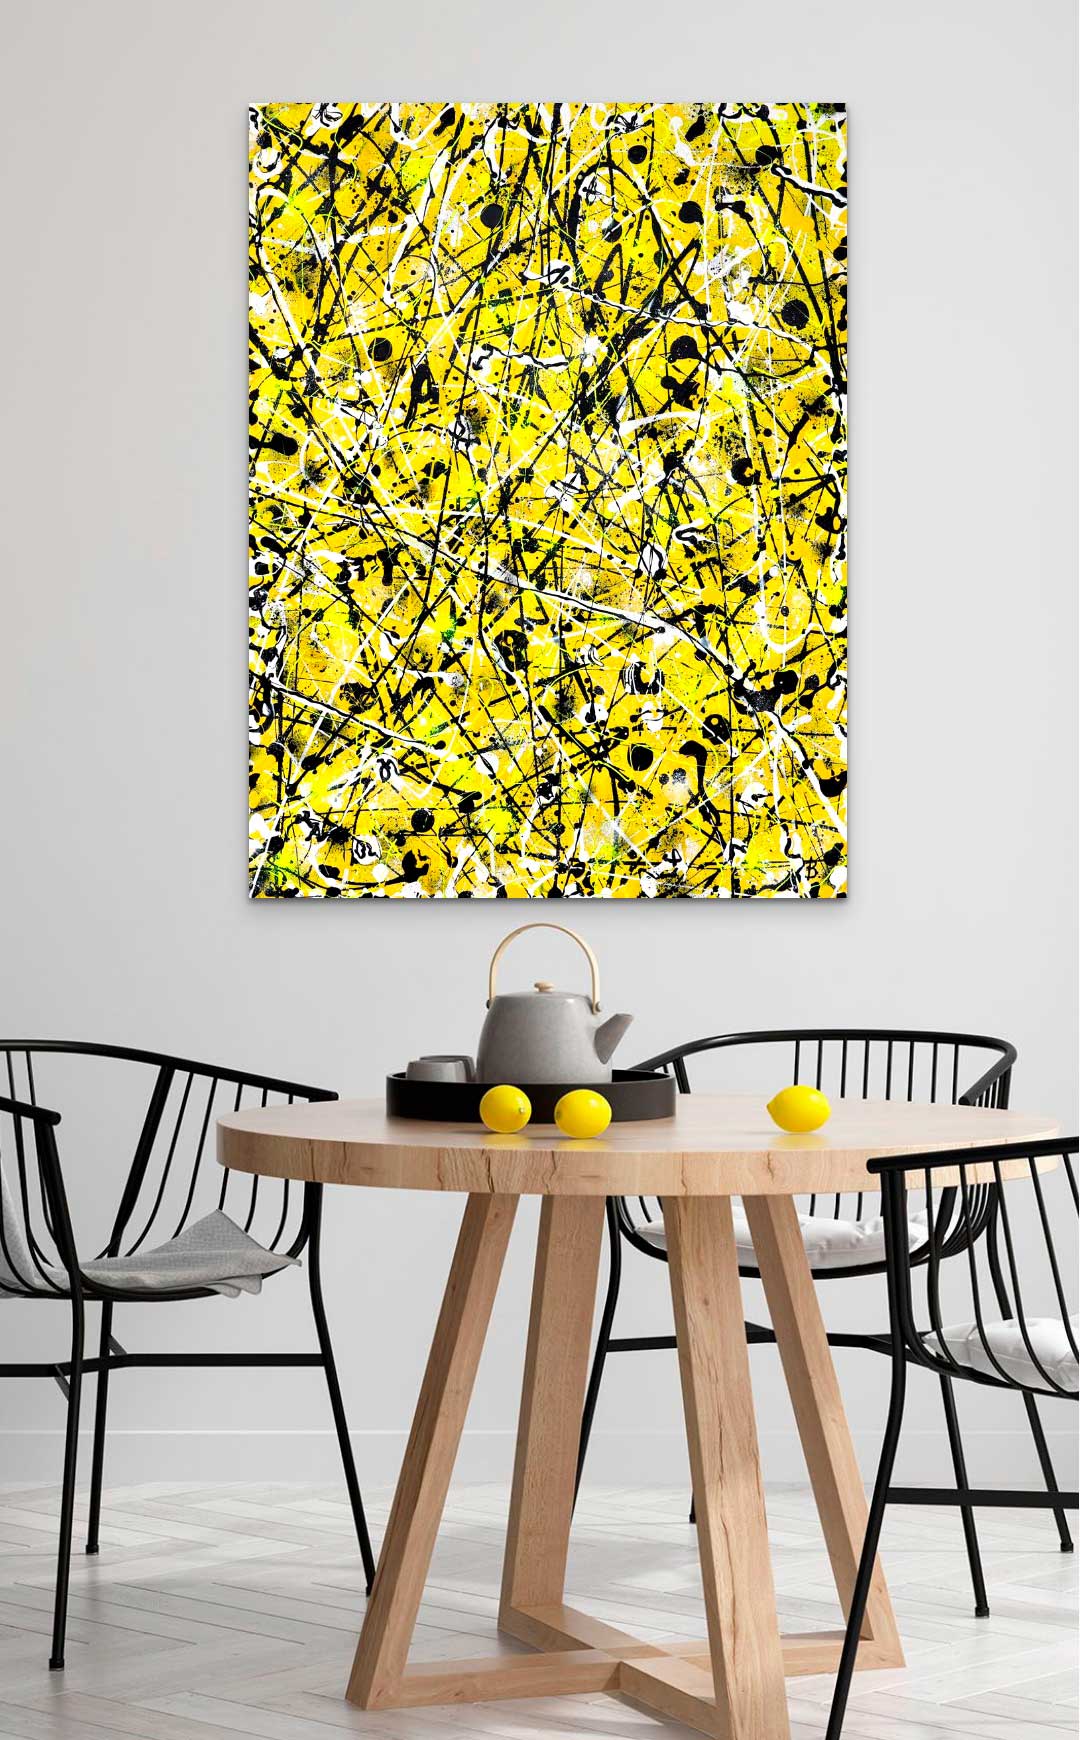 Beehive, large, colourful, original abstract hanging in dining room near table and chairs. Artwork painted by Abstract Artist, Bridget Bradley